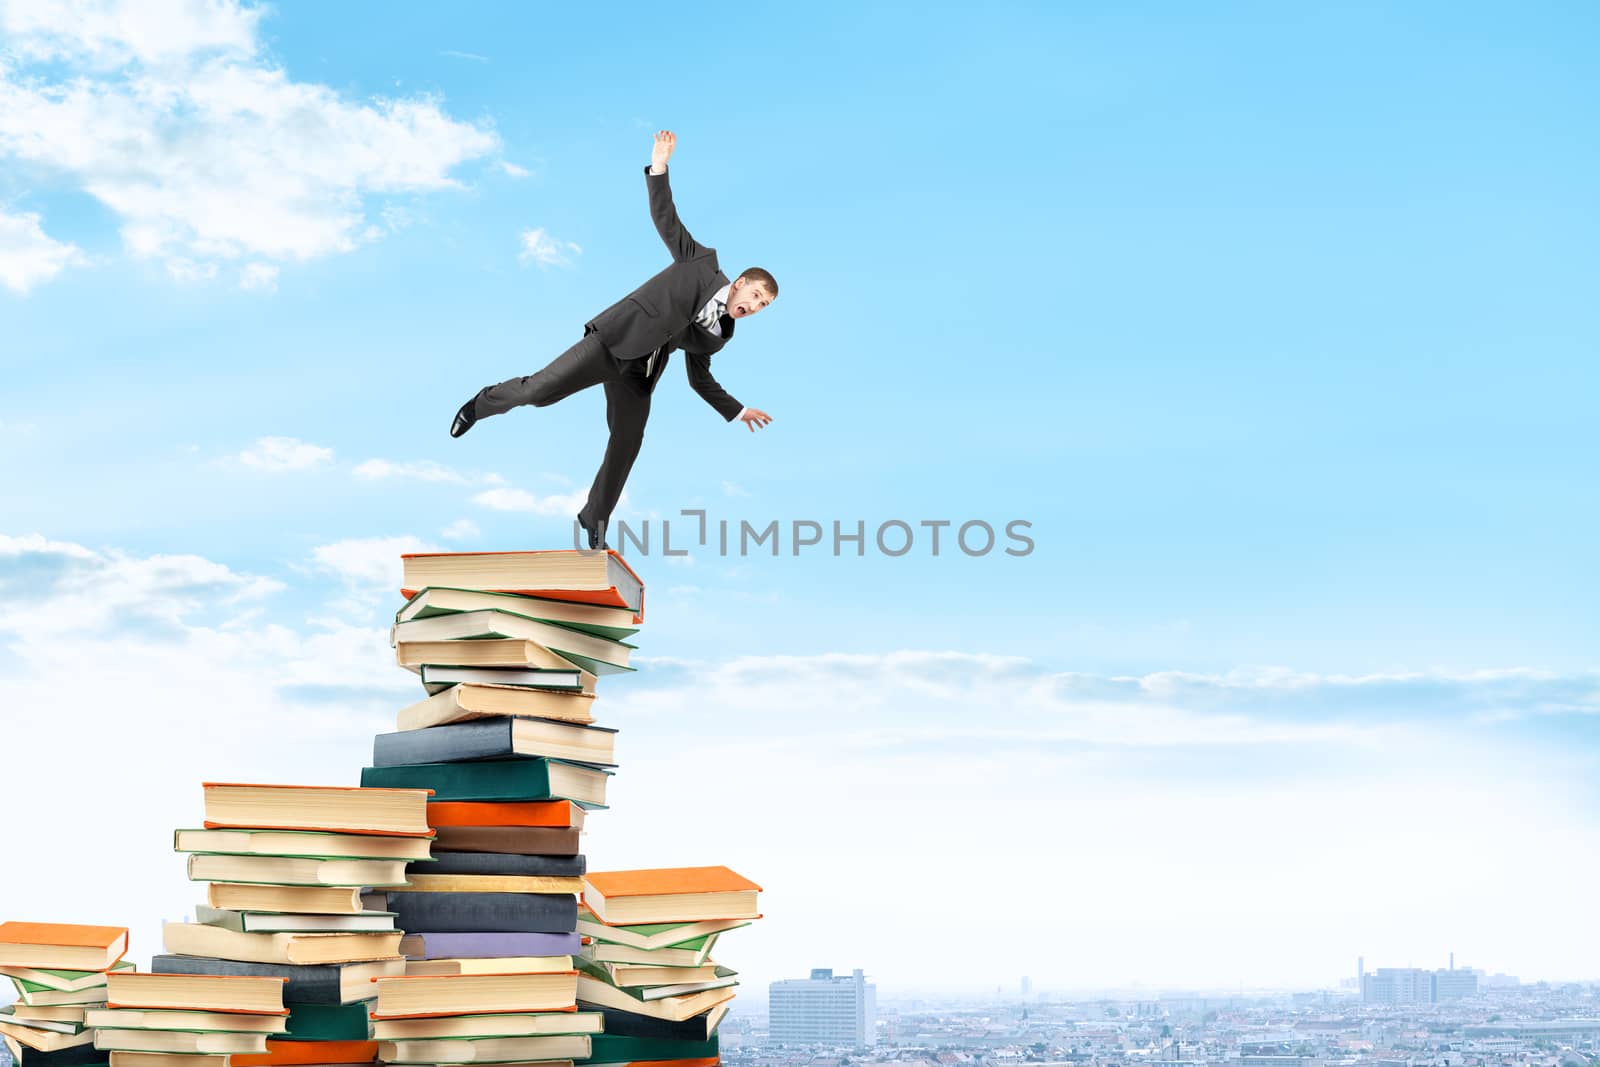 Businessman on pile of books trying not to fall, business concept